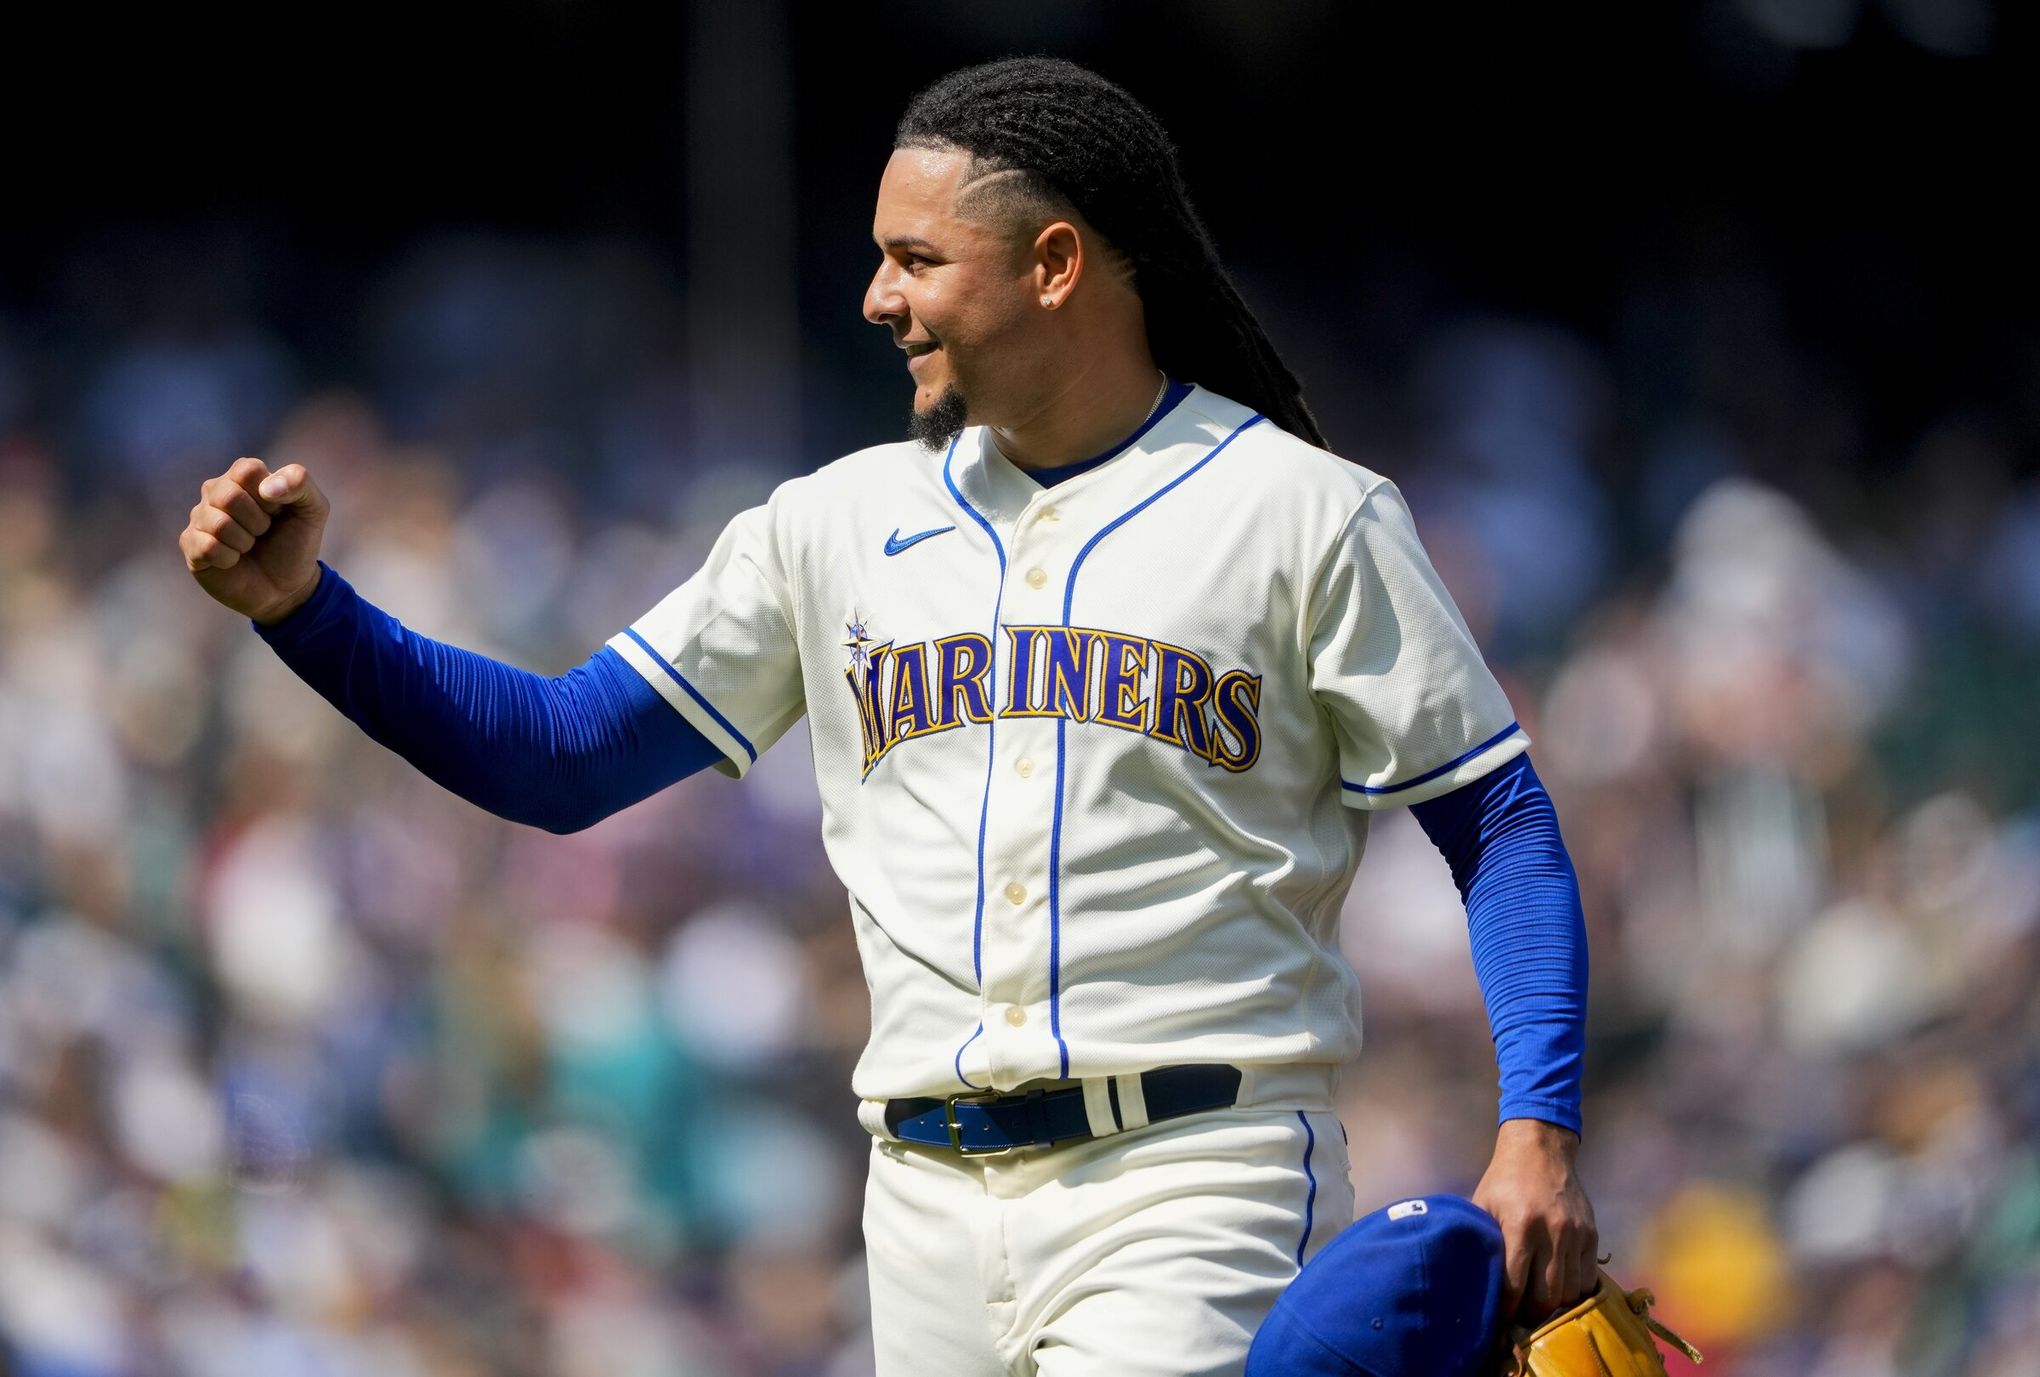 Best Mariners players by uniform number